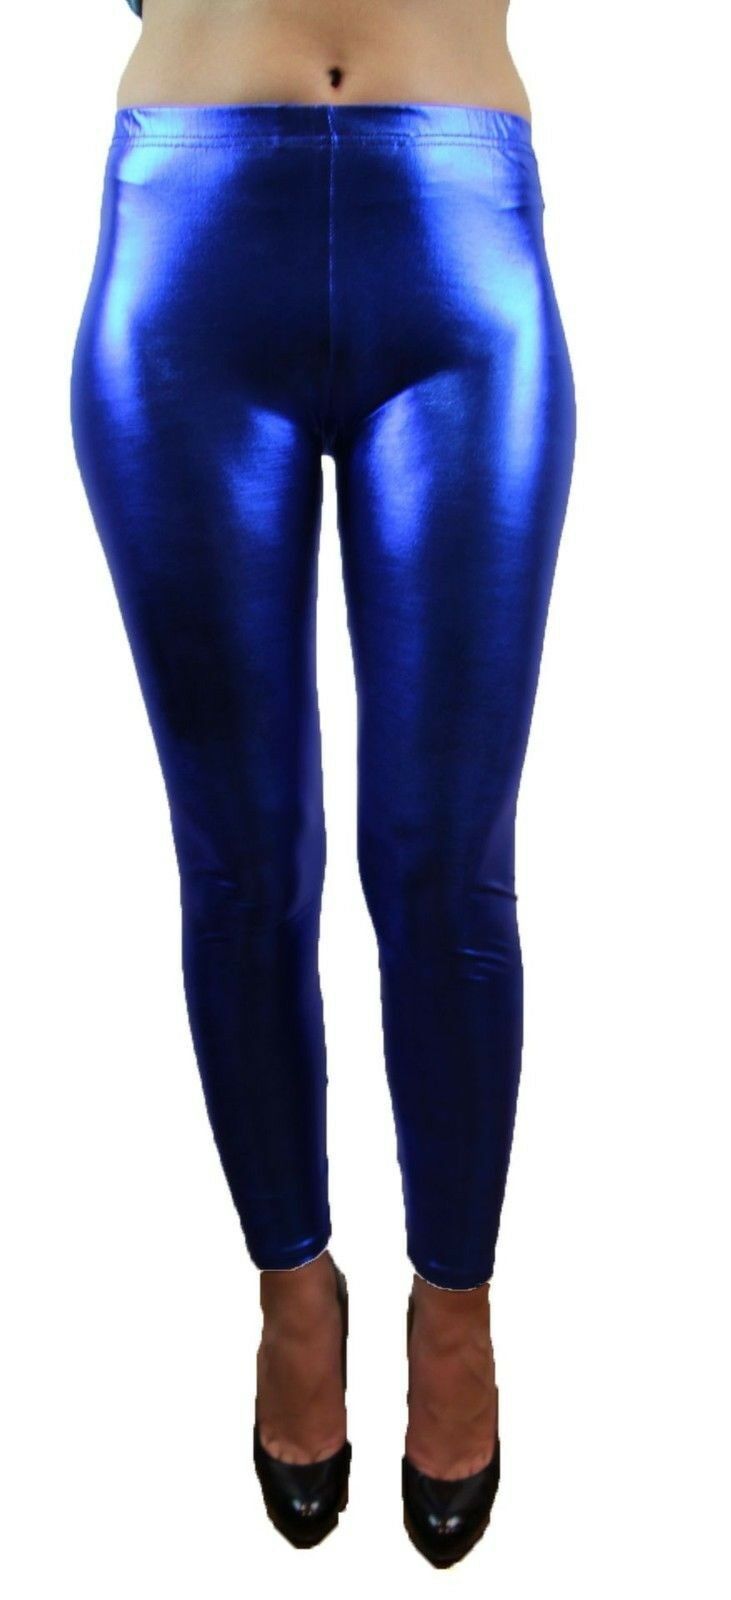 Metallic Leggings Shiny Neon Stretch Sexy Party Costume Fancy Dress Silver Gold